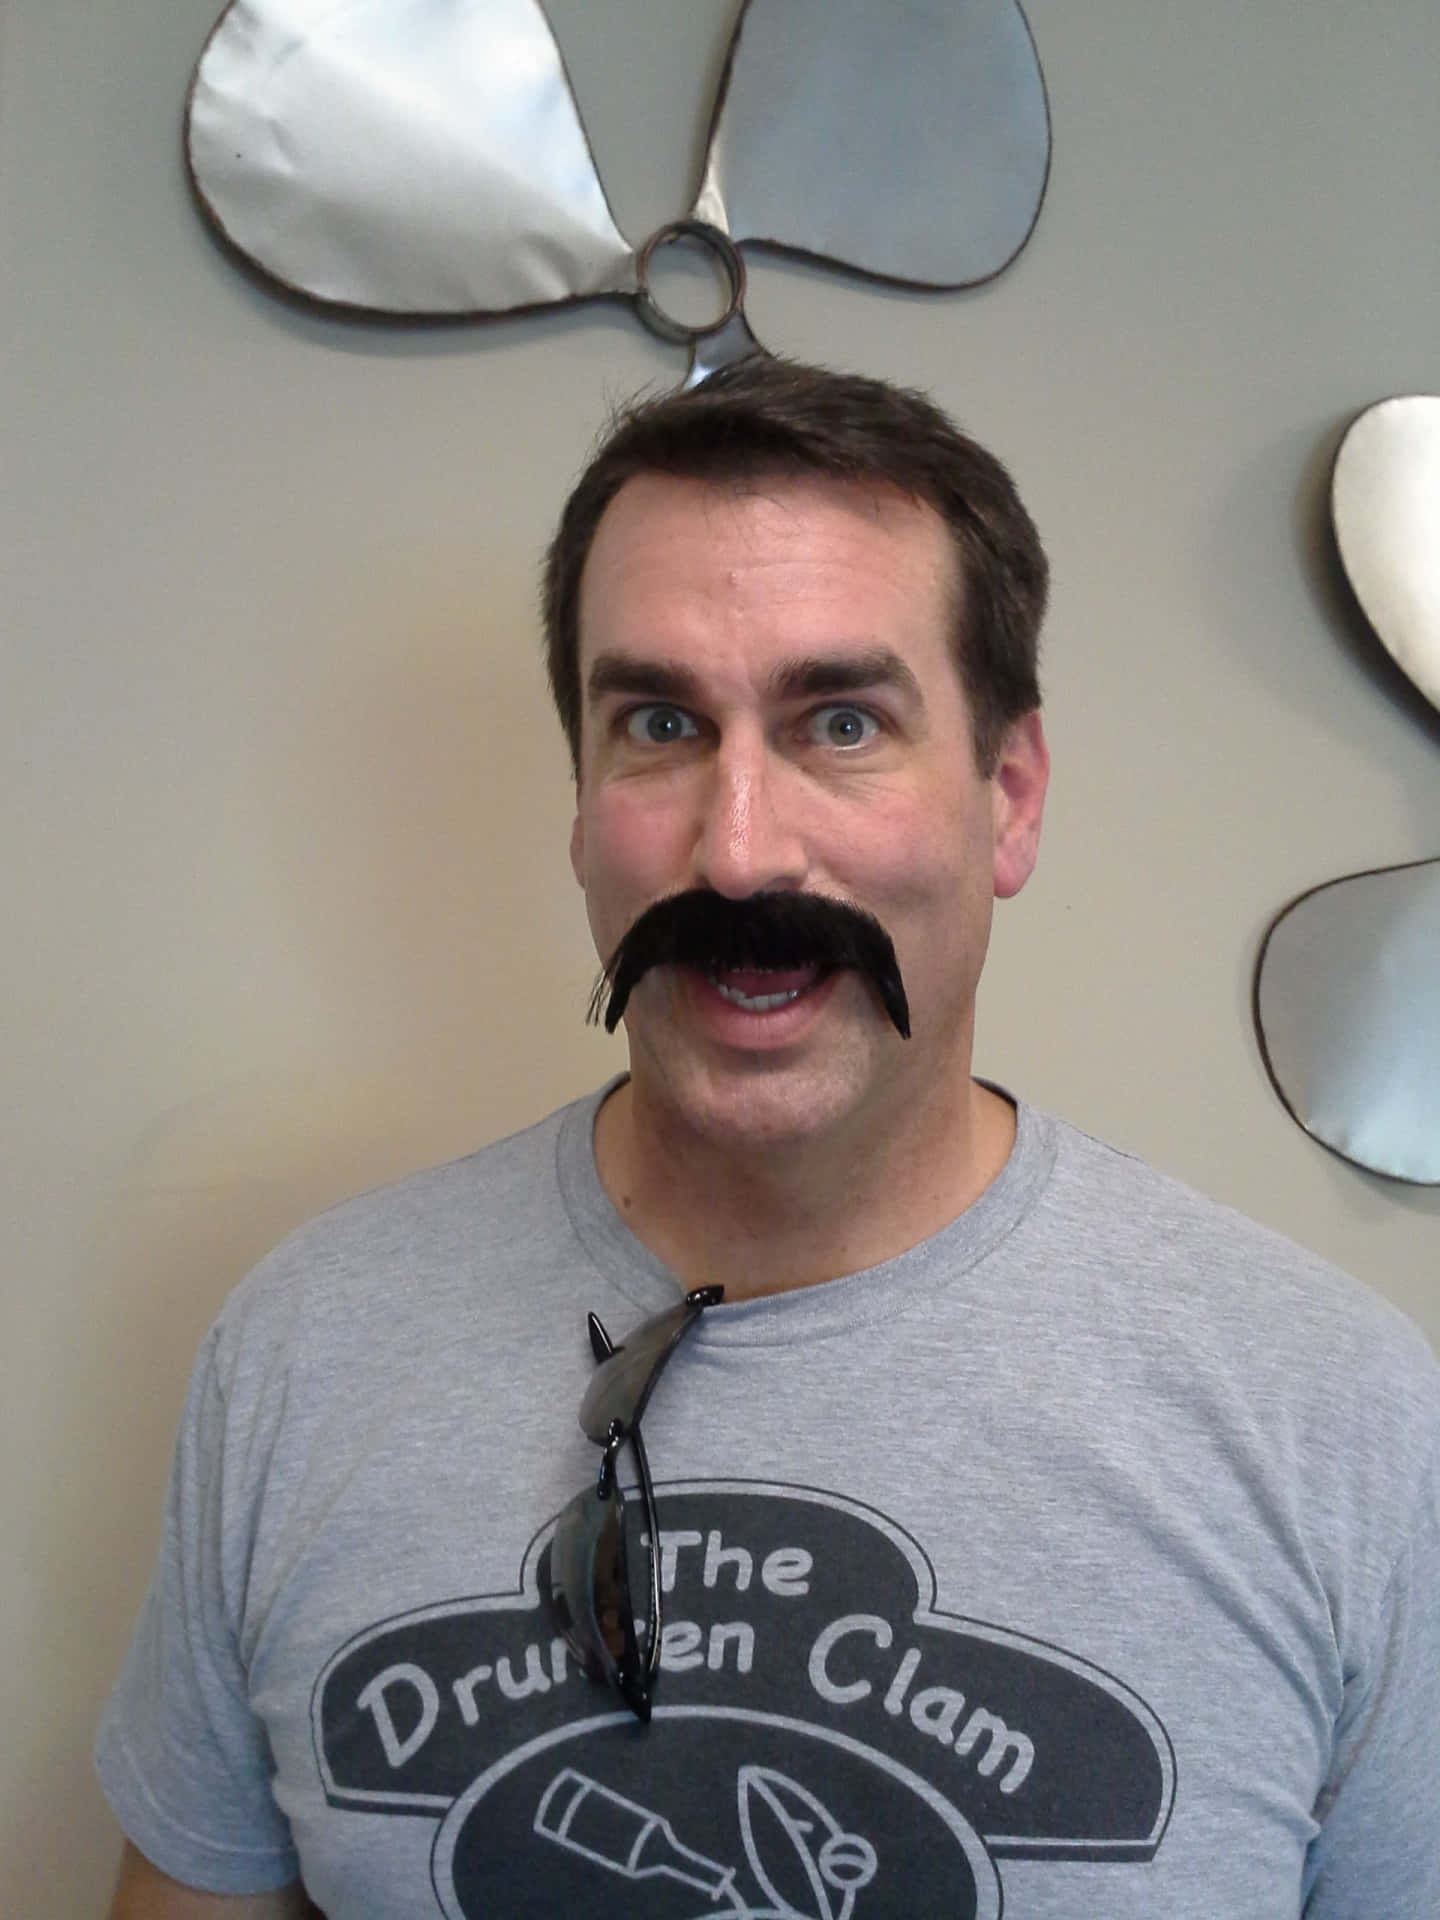 “Comedian Rob Riggle at his Finest” Wallpaper